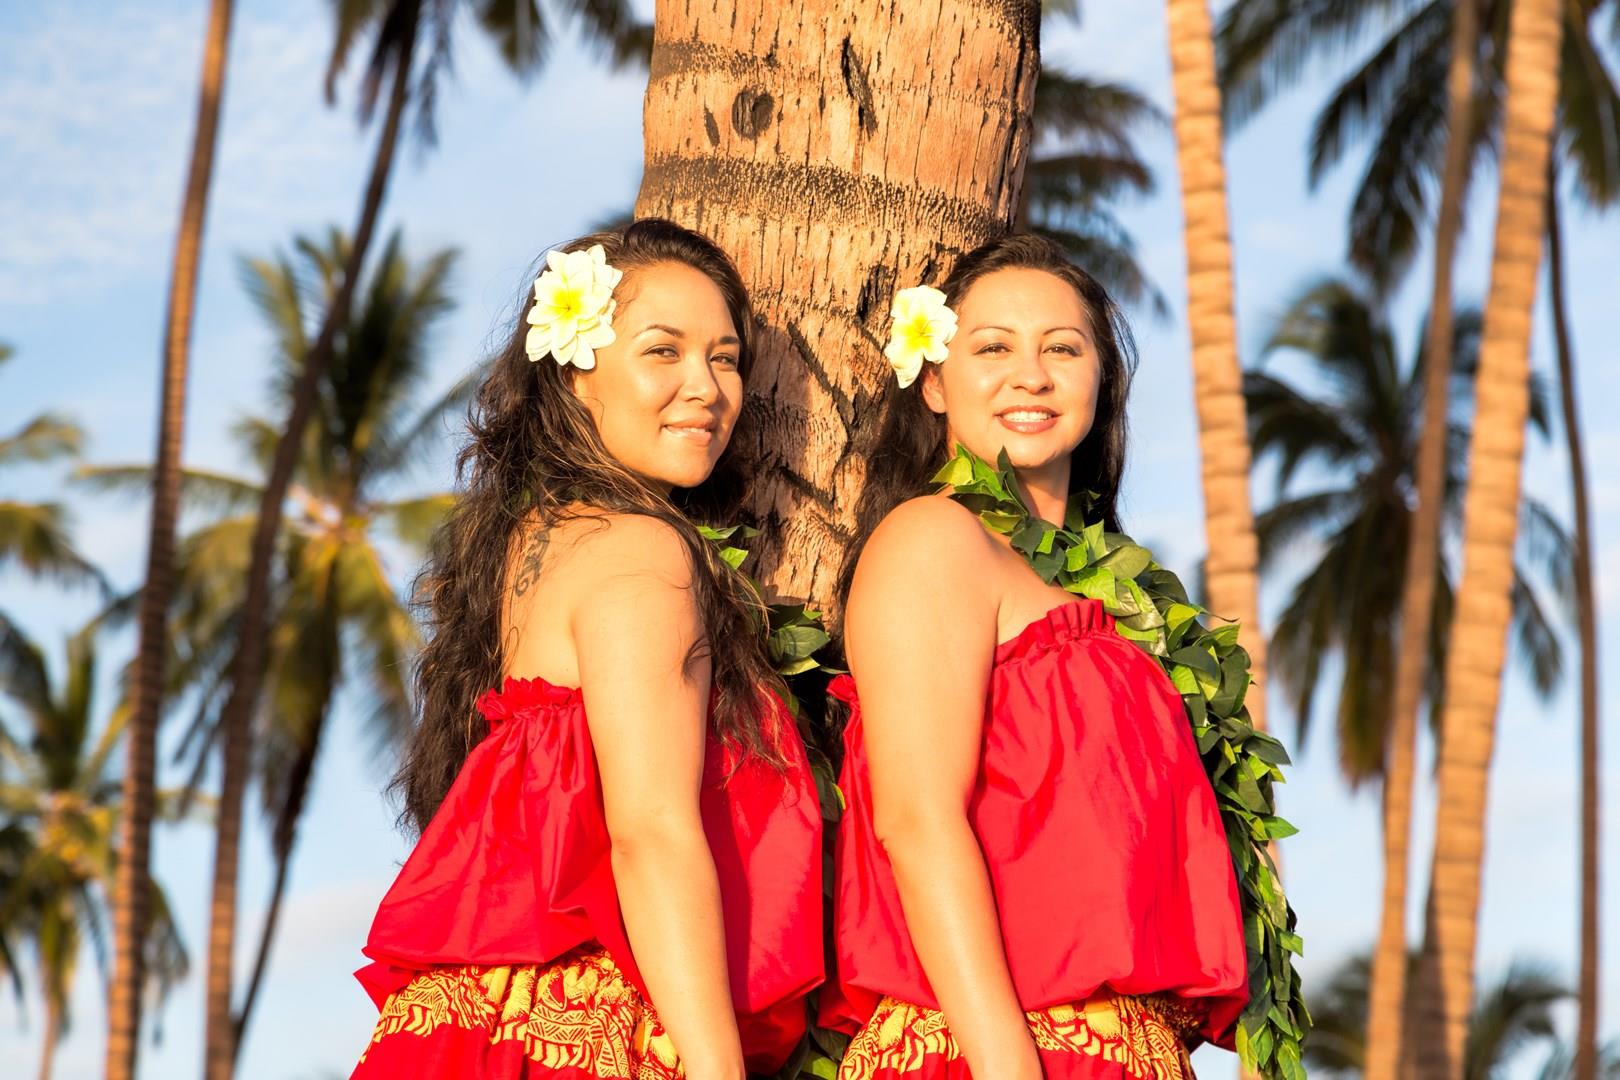 escorted tours of hawaii